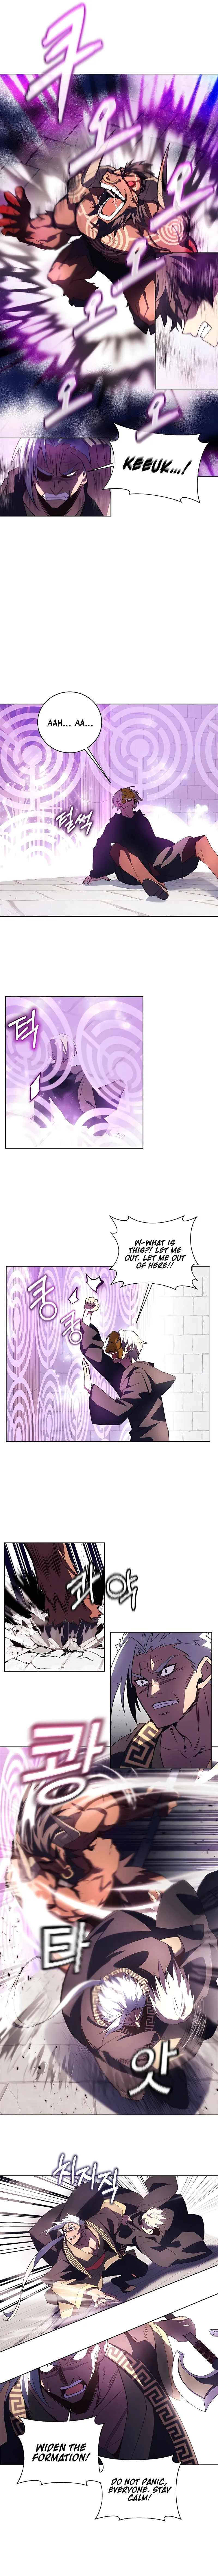 I Became A Part Time Employee For Gods Chapter 7 page 7